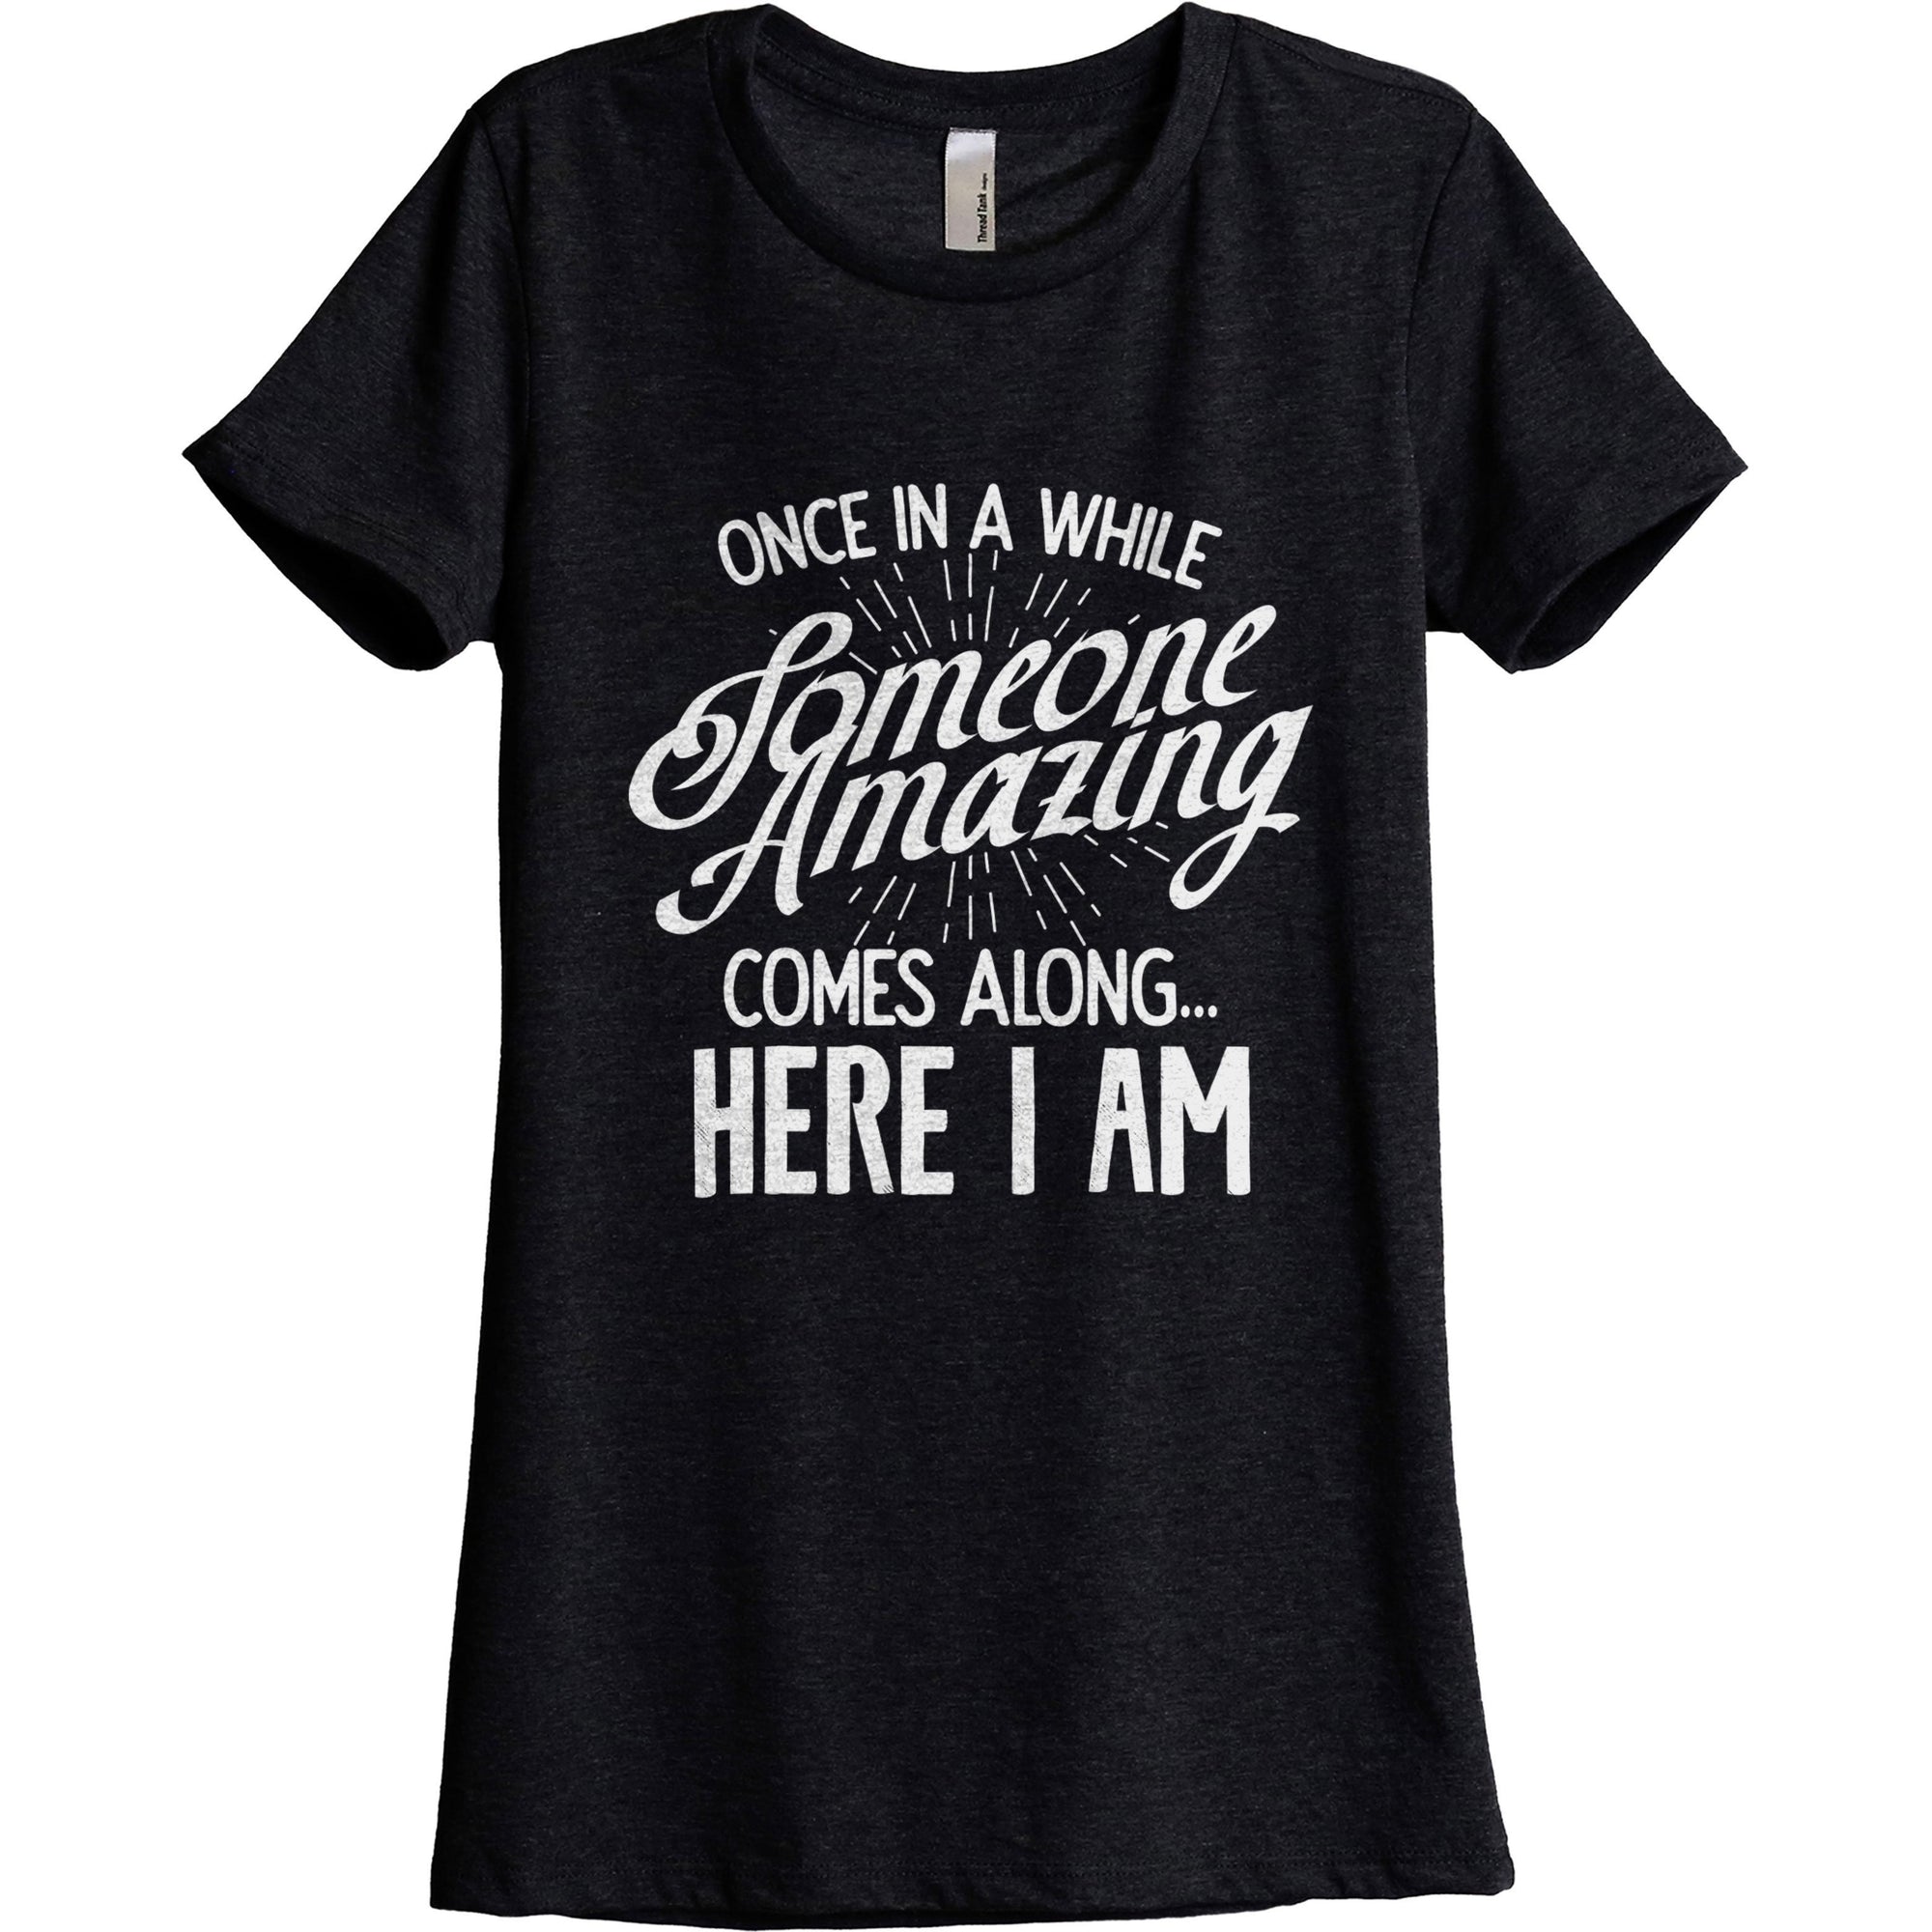 Once In A While Someone Amazing Comes Along and Here I Am - threadtank | stories you can wear